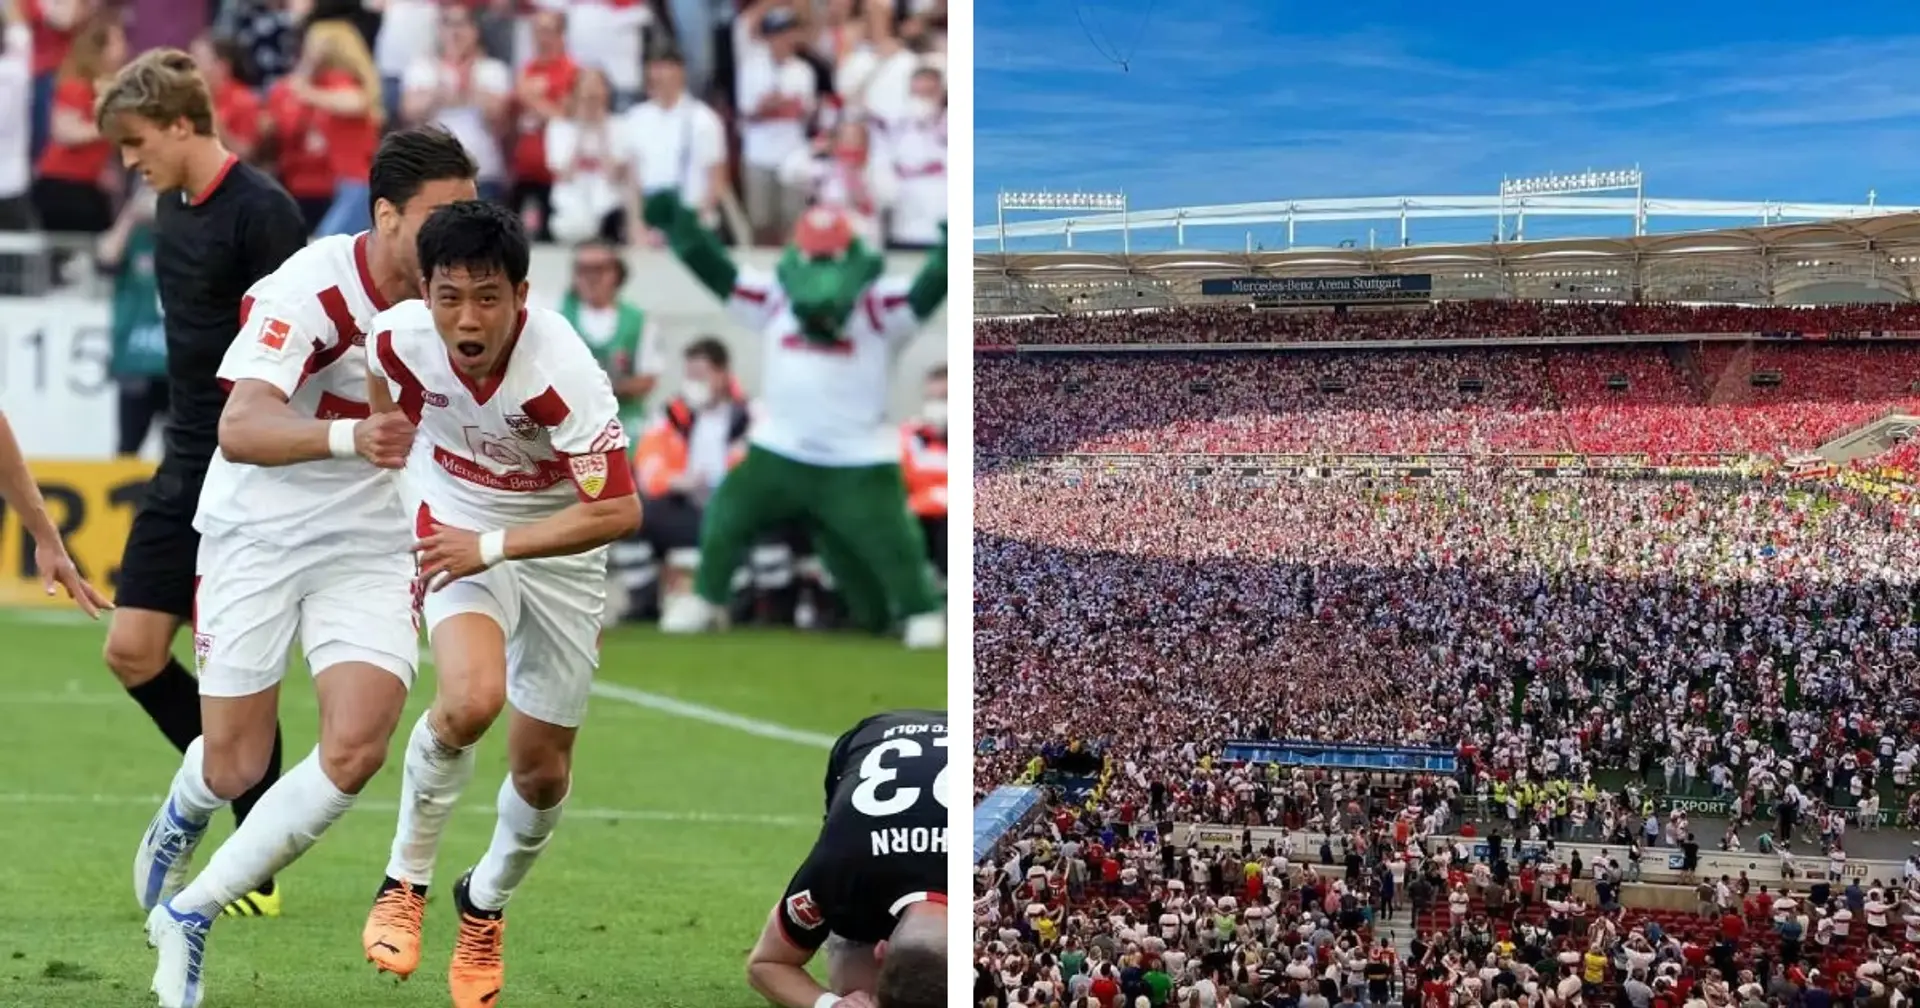 'To be a captain and to save your team like this': Recalling how Endo kept Stuttgart in the Bundesliga